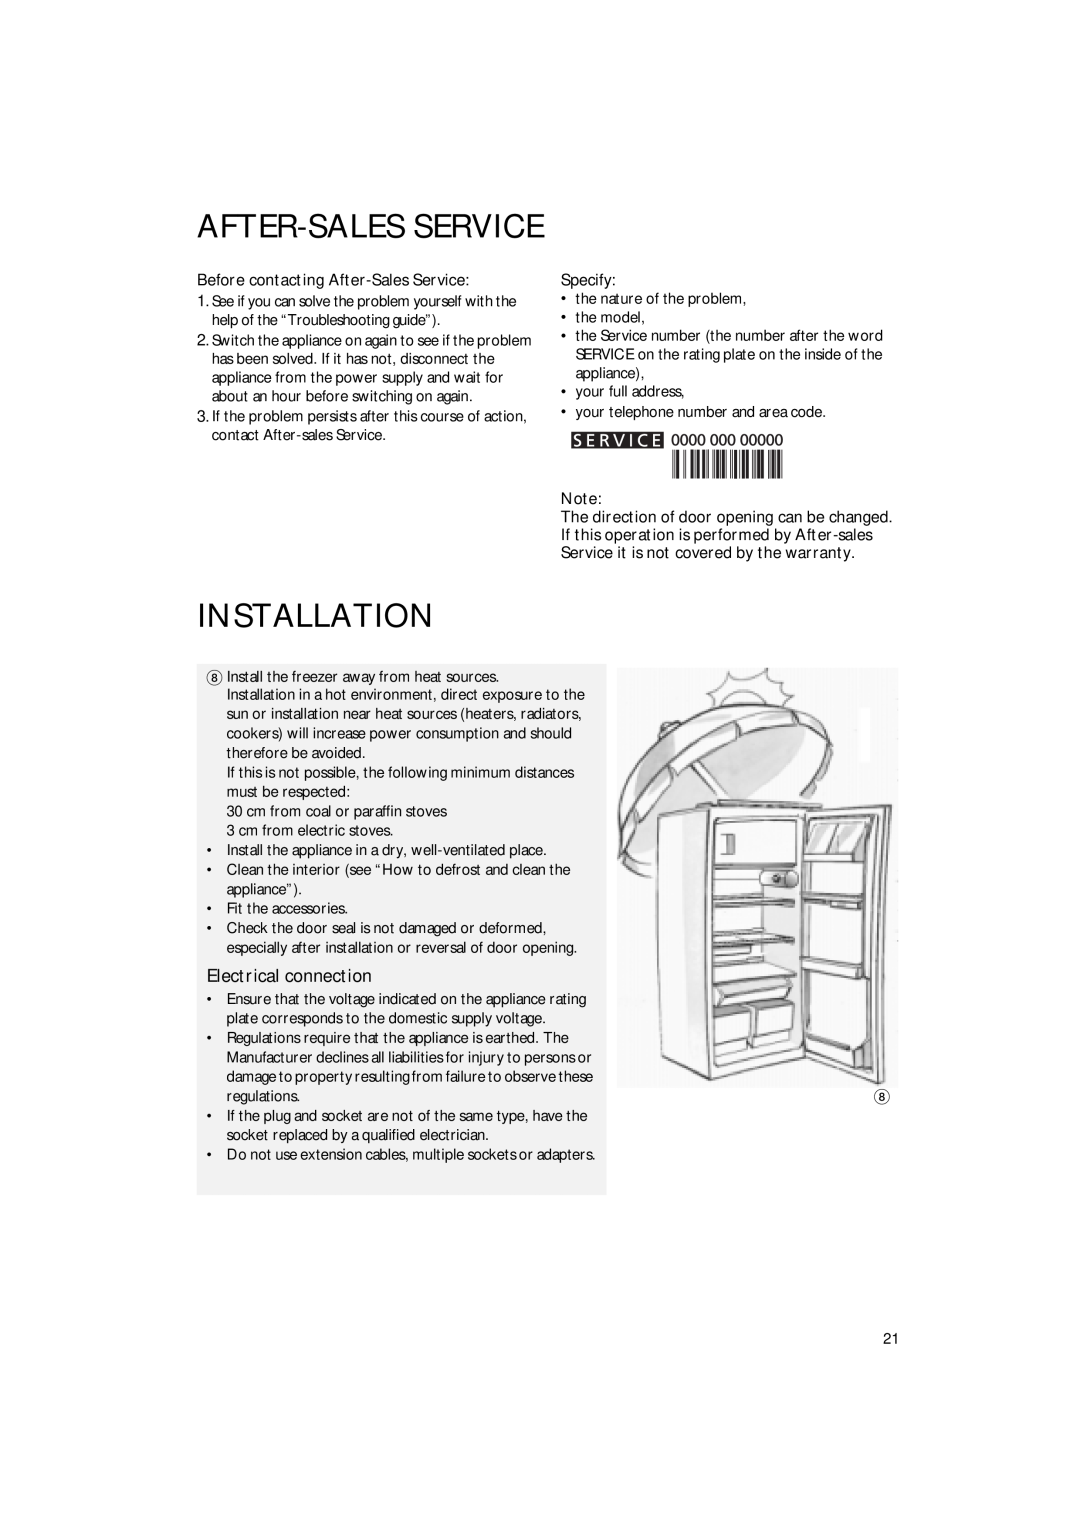 Smeg FR220A1 manual After-Salesservice, Installation, Electrical connection 